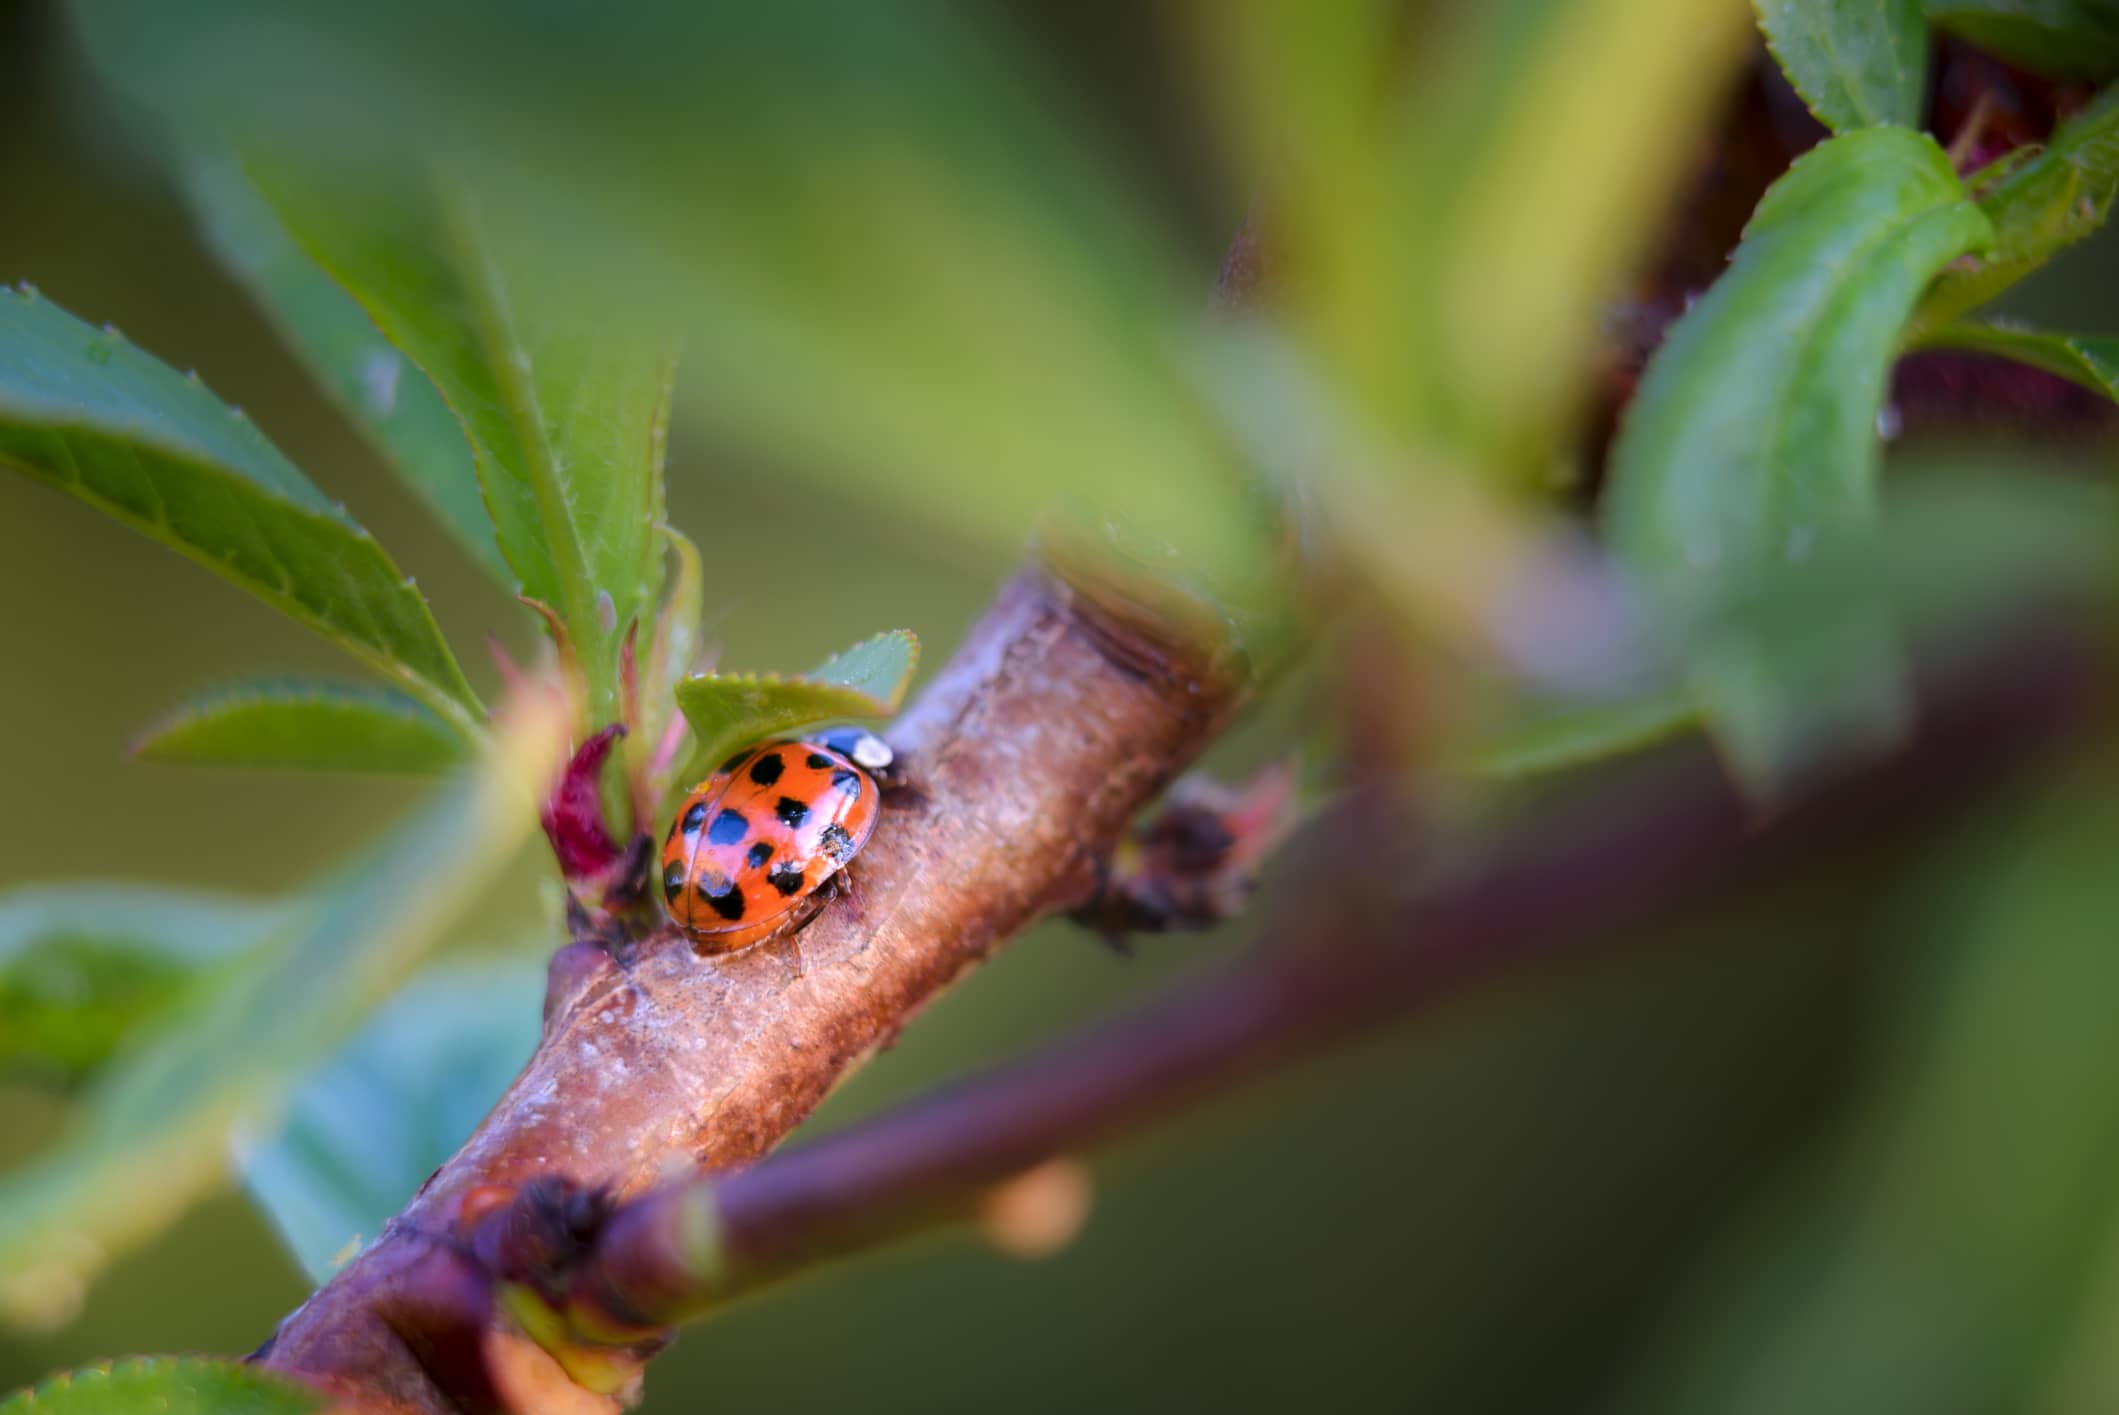 Attract Good Pests to Garden